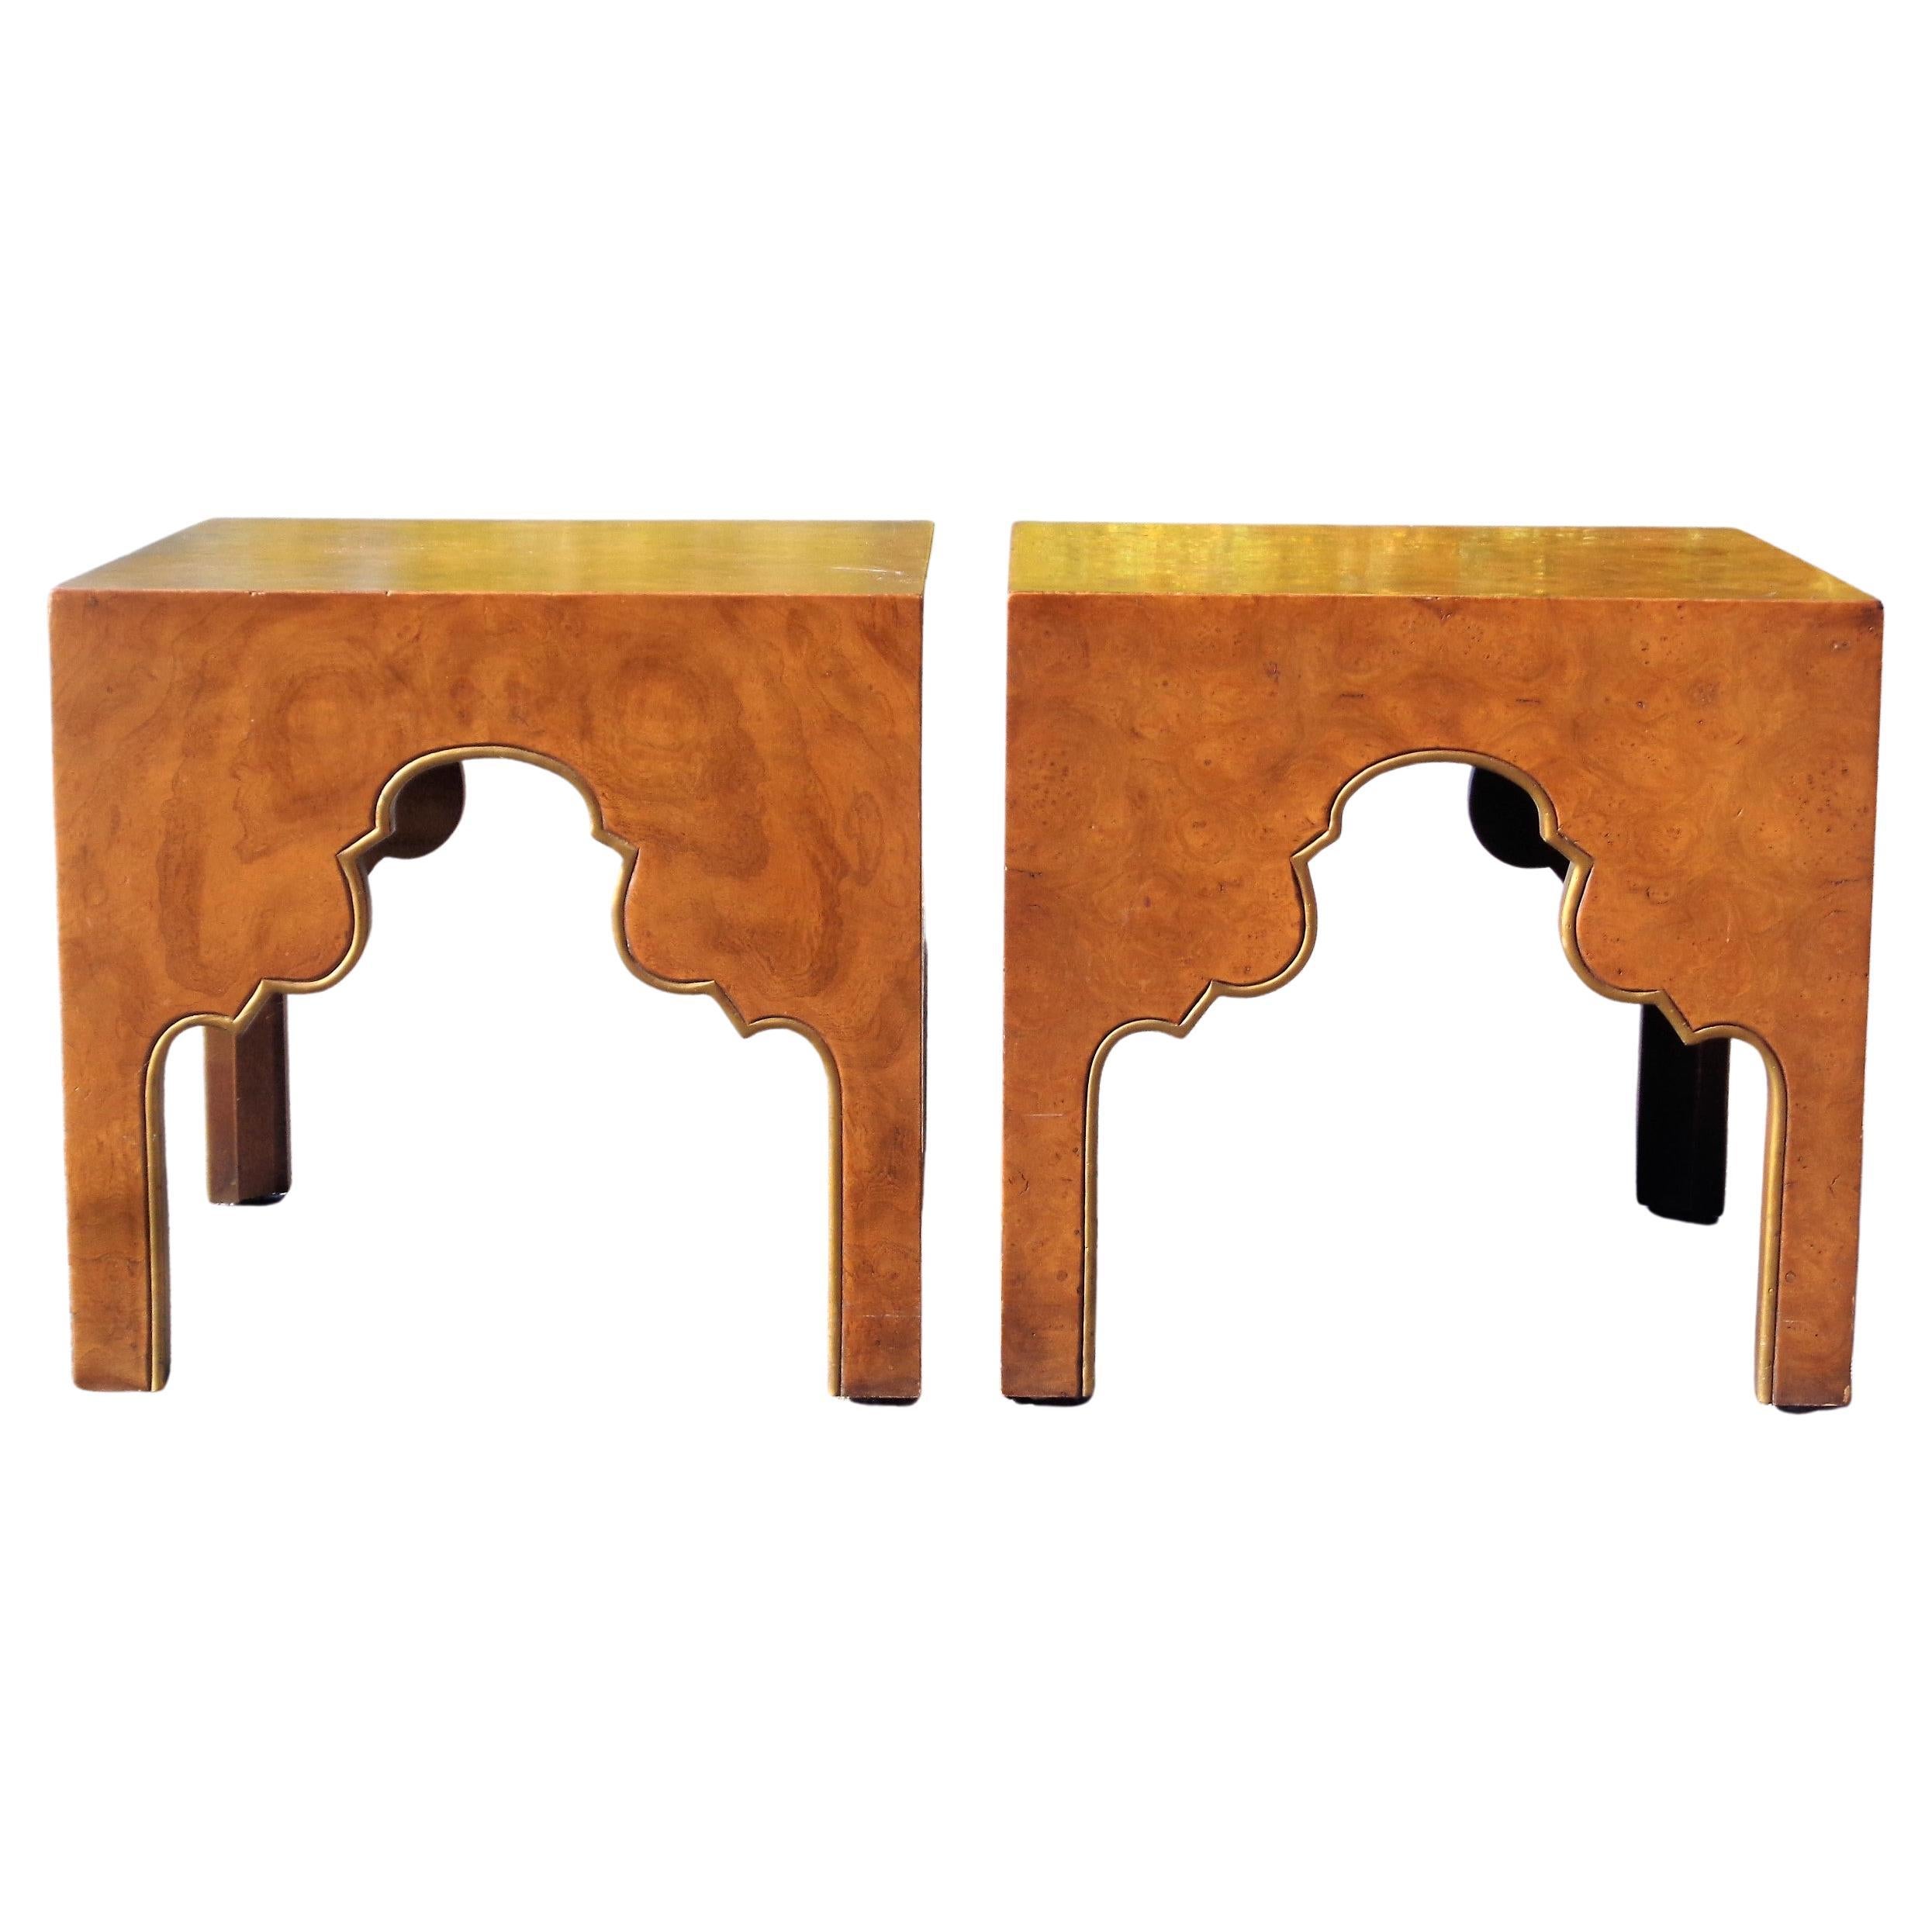 Pair of beautifully figured burled carpathian elm side tables / end tables in the Moorish style with gilded aprons on all four sides reminiscent of a minaret. Drexel Furniture - Repertoire Collection, dated 1964. Signed underside bottom. Look at all